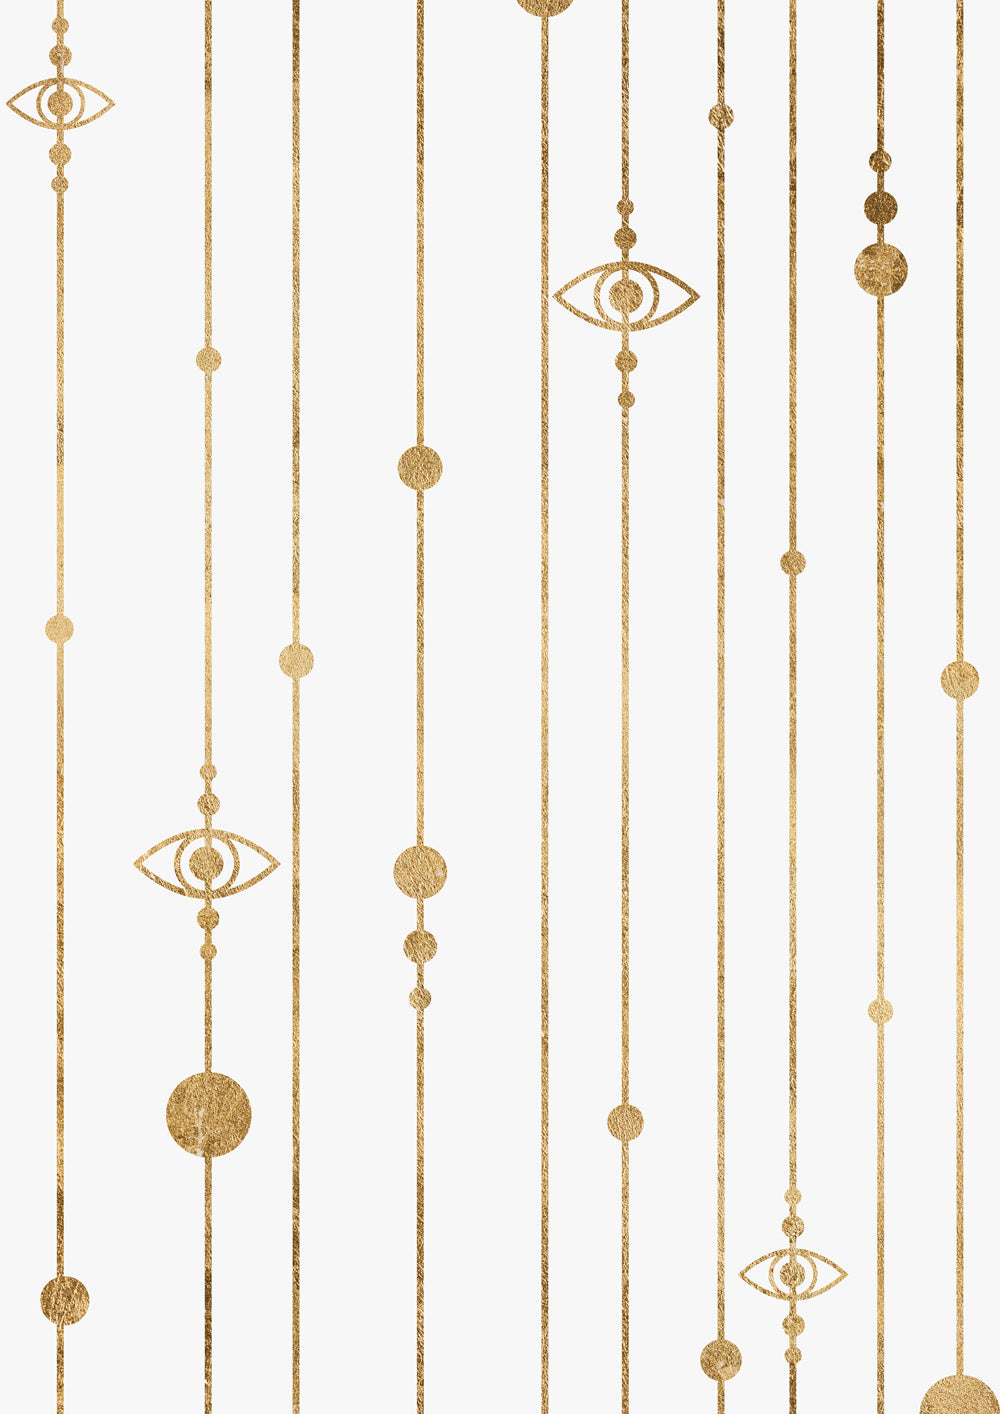 Cosmos Astrology Zodiac Horoscope Gold Planets and All Seeing Eye Wall Art Print 'Triangulum'